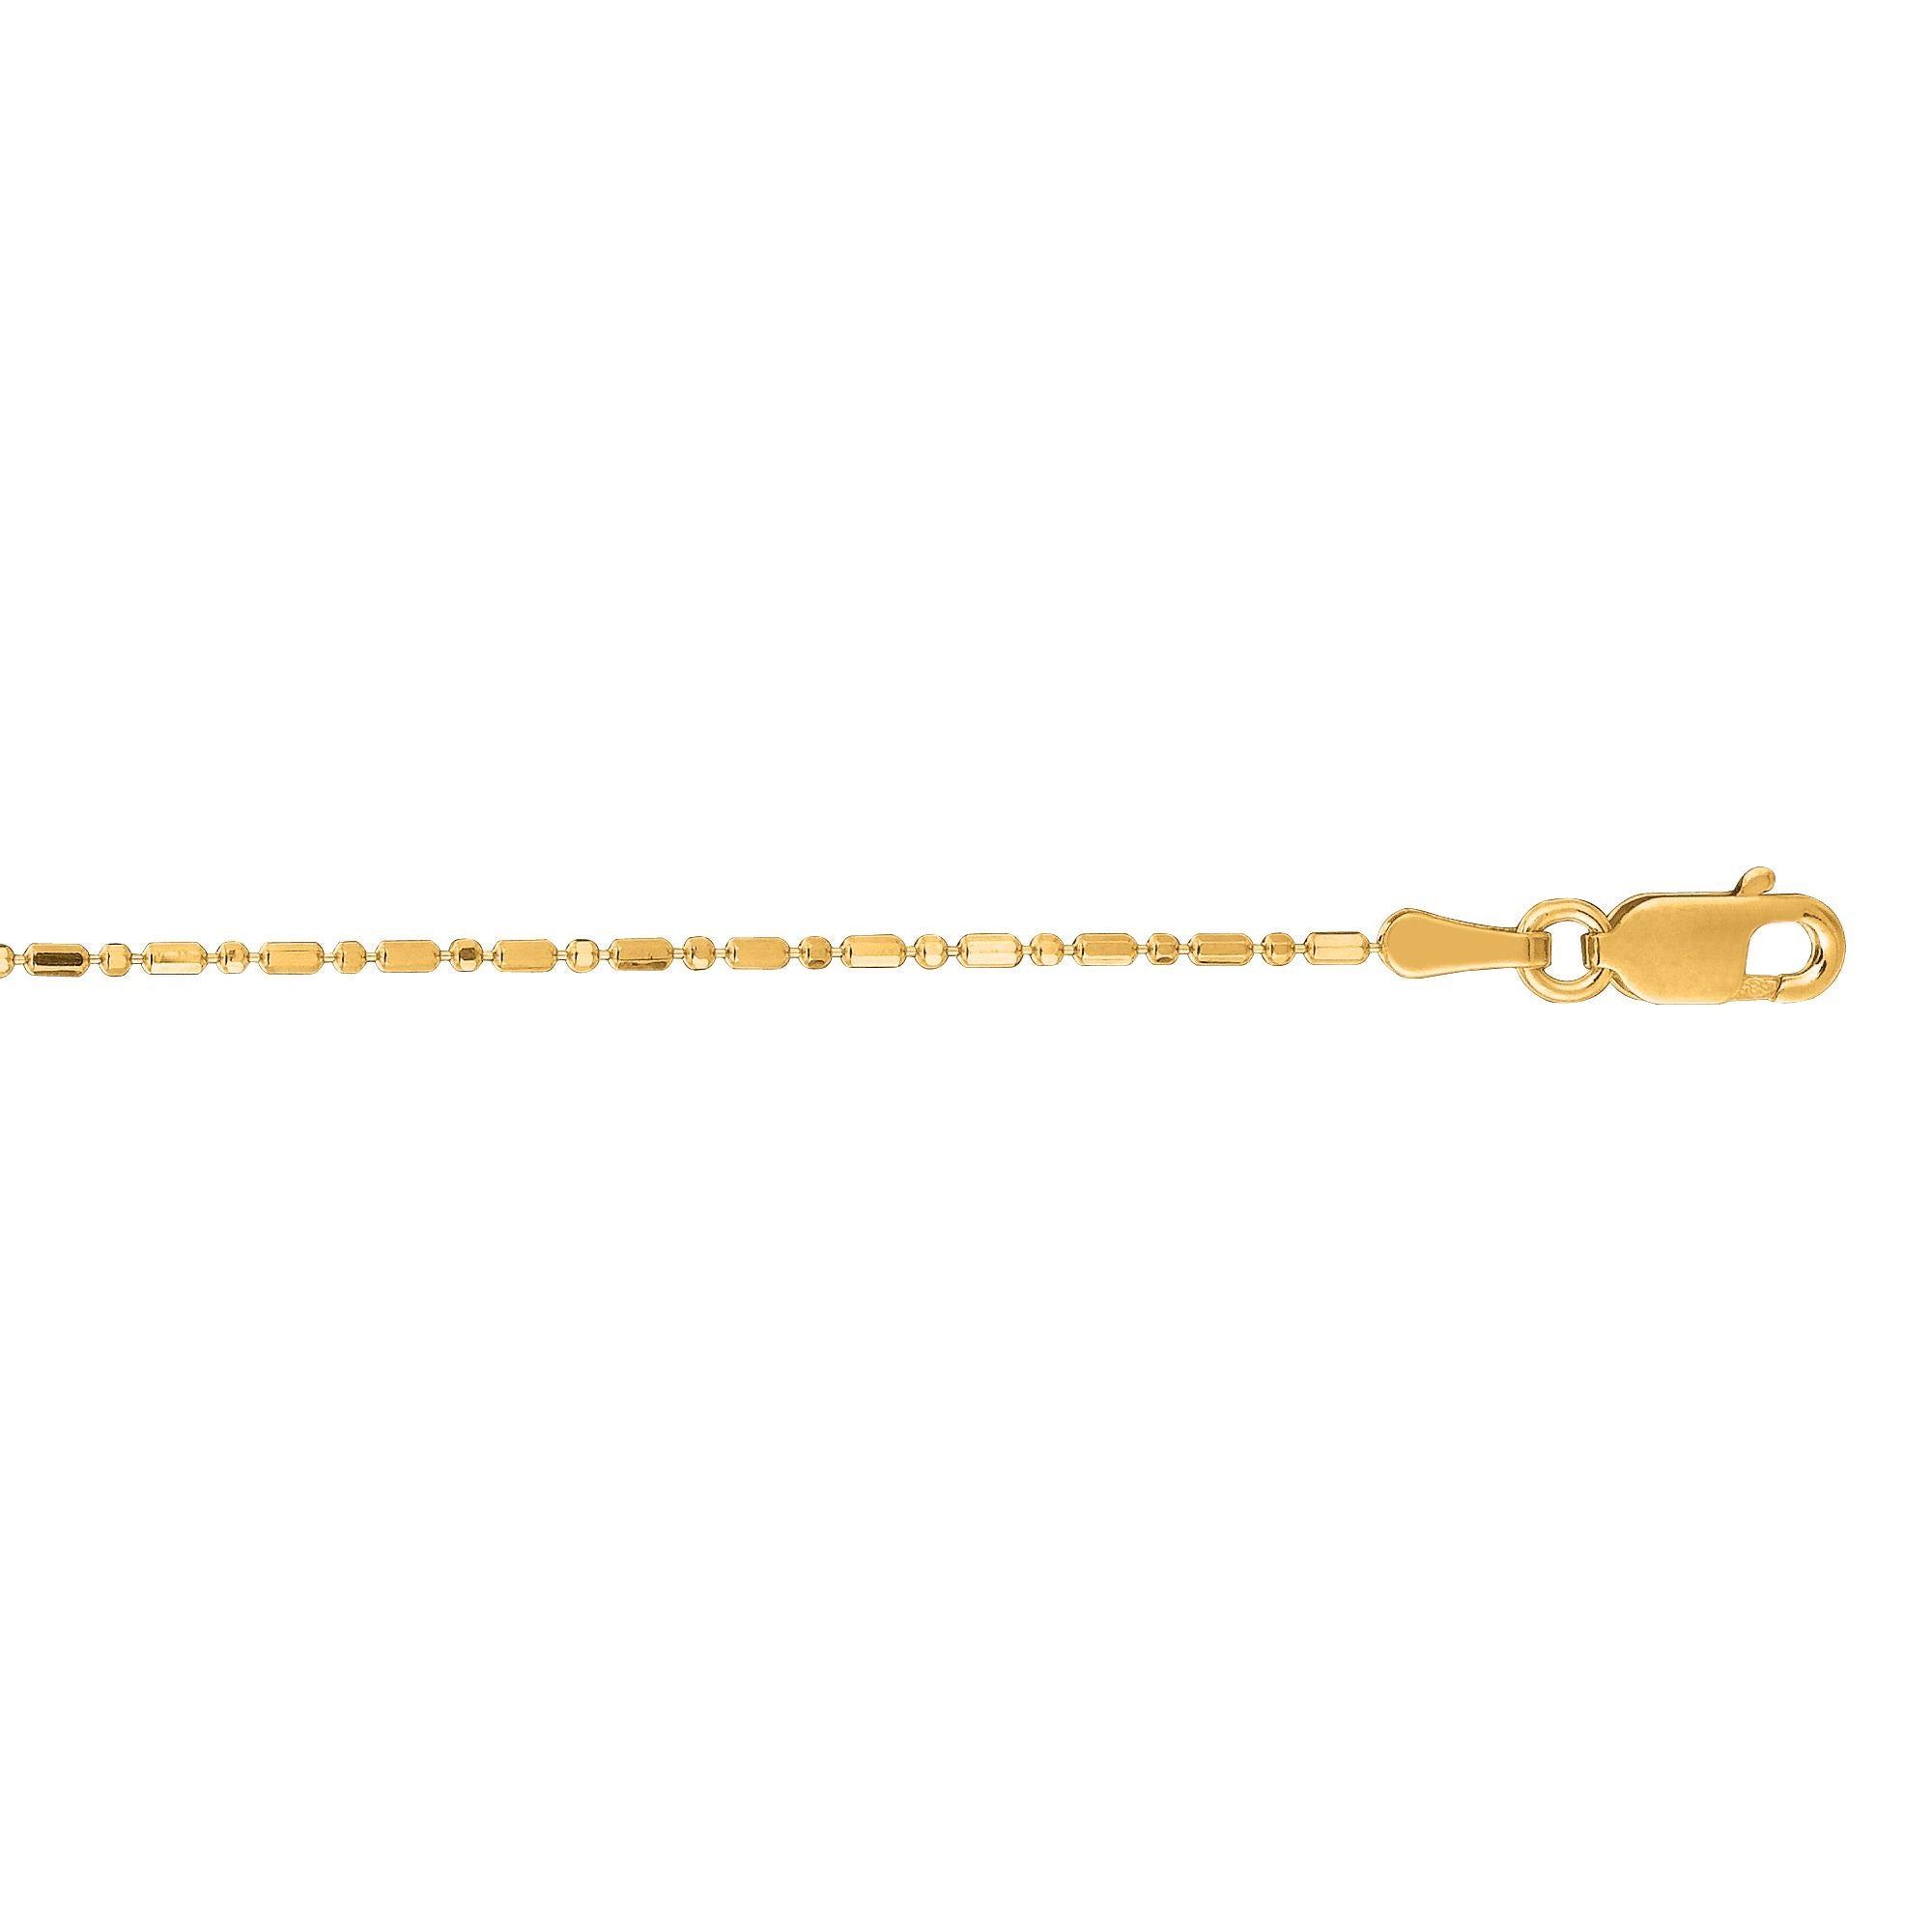 Shiny Diamond Cut Alternate Bar and Bead Chain with Lobster Clasp - wingroupjewelry